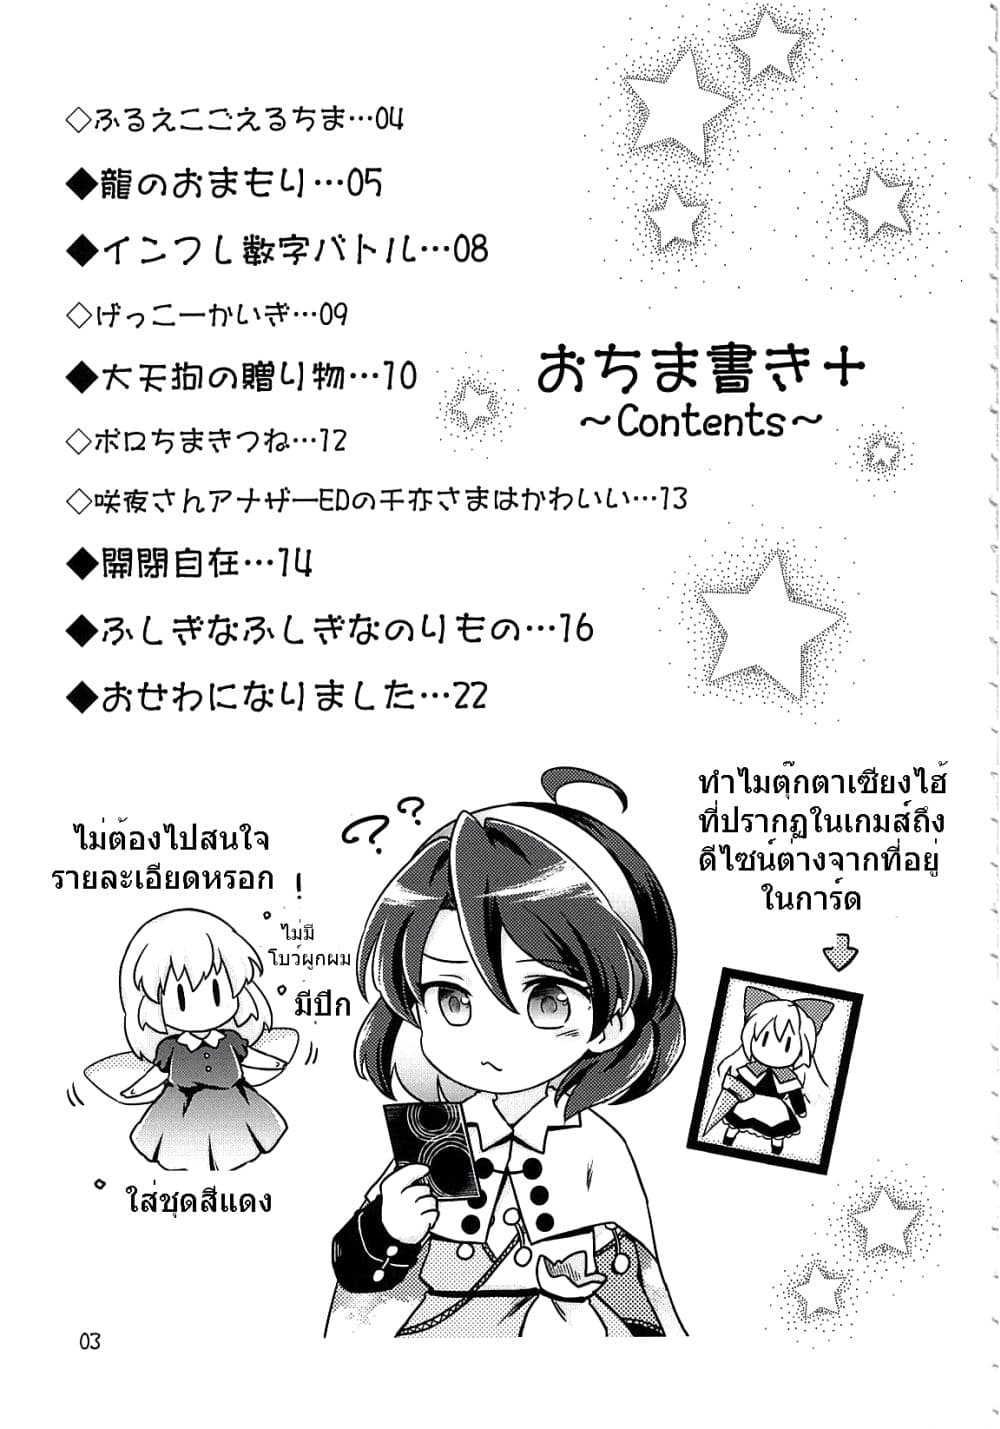 Touhou Project Chima Book By Pote ตอนที่ 2 (3)